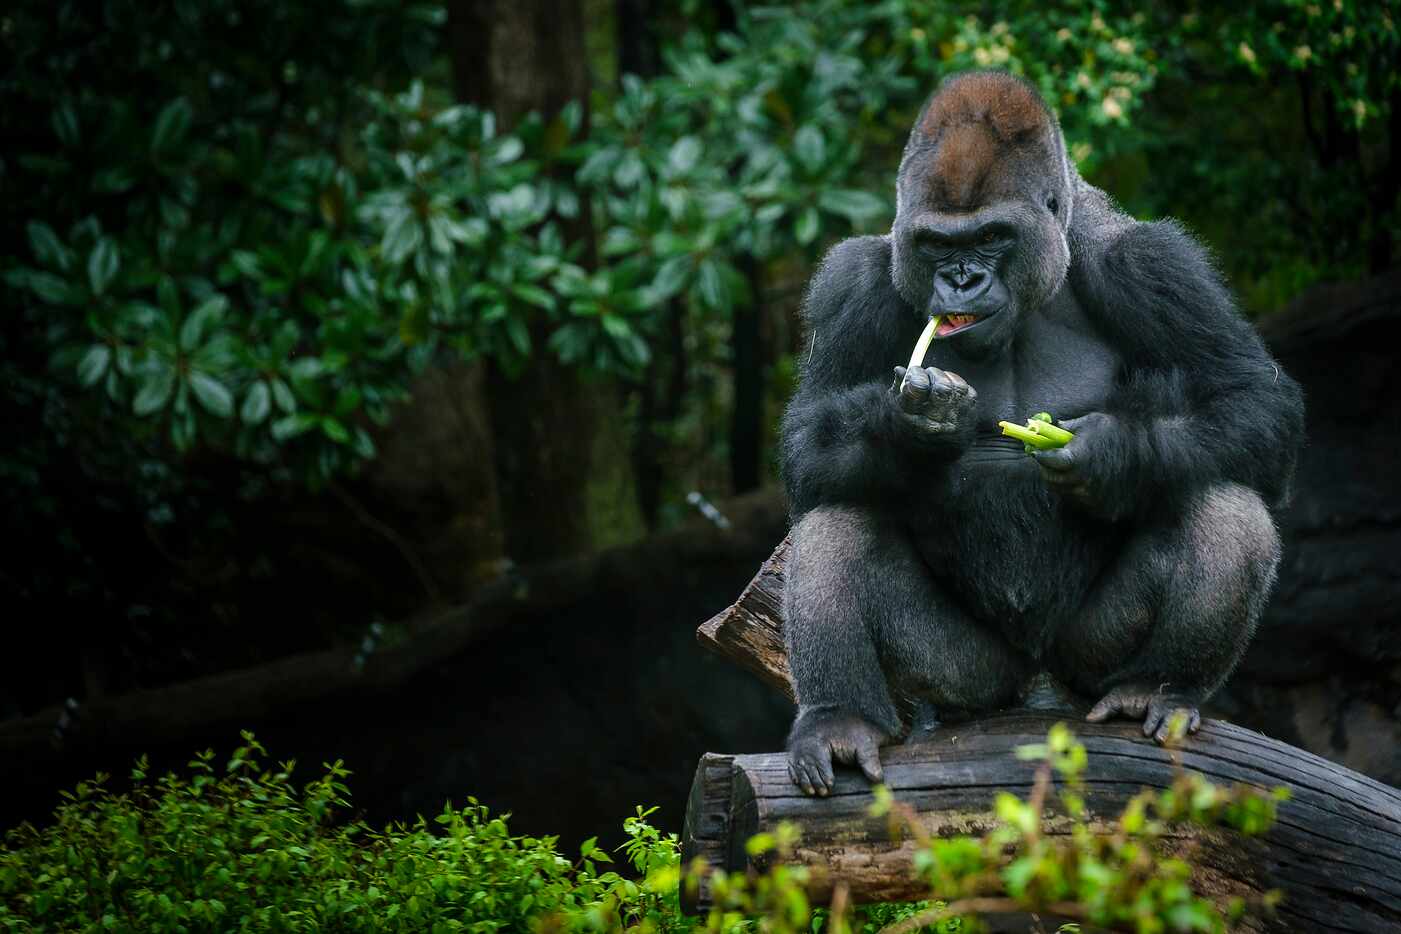 A a gorilla munches on celery inside the Gorilla Research Station habitat at the Dallas Zoo.